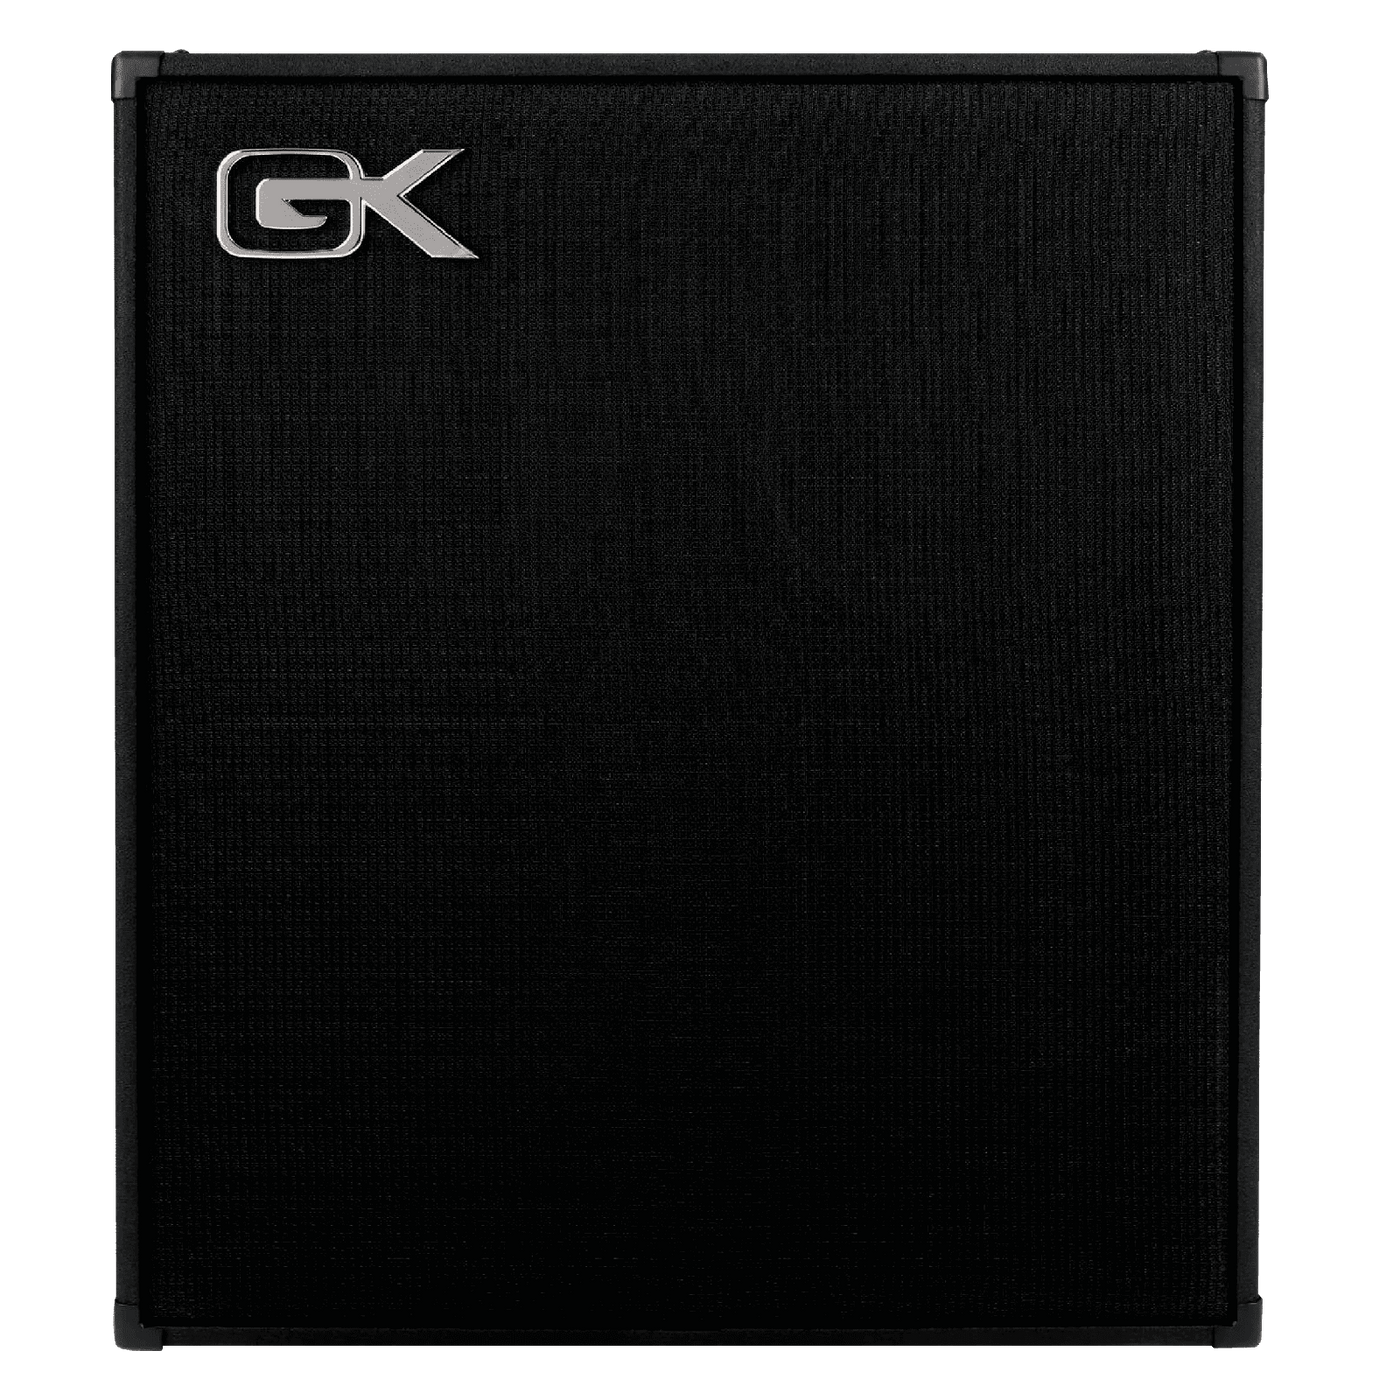 Gallien-Krueger CX410 - GK has built the CX 410 bass cab for maximum efficiency with a quartet of 10" cast-frame ceramic woofers loaded in a compact feather-weight enclosure you'll stand a good chance of fitting into your car. The CX 410 is one of the sma